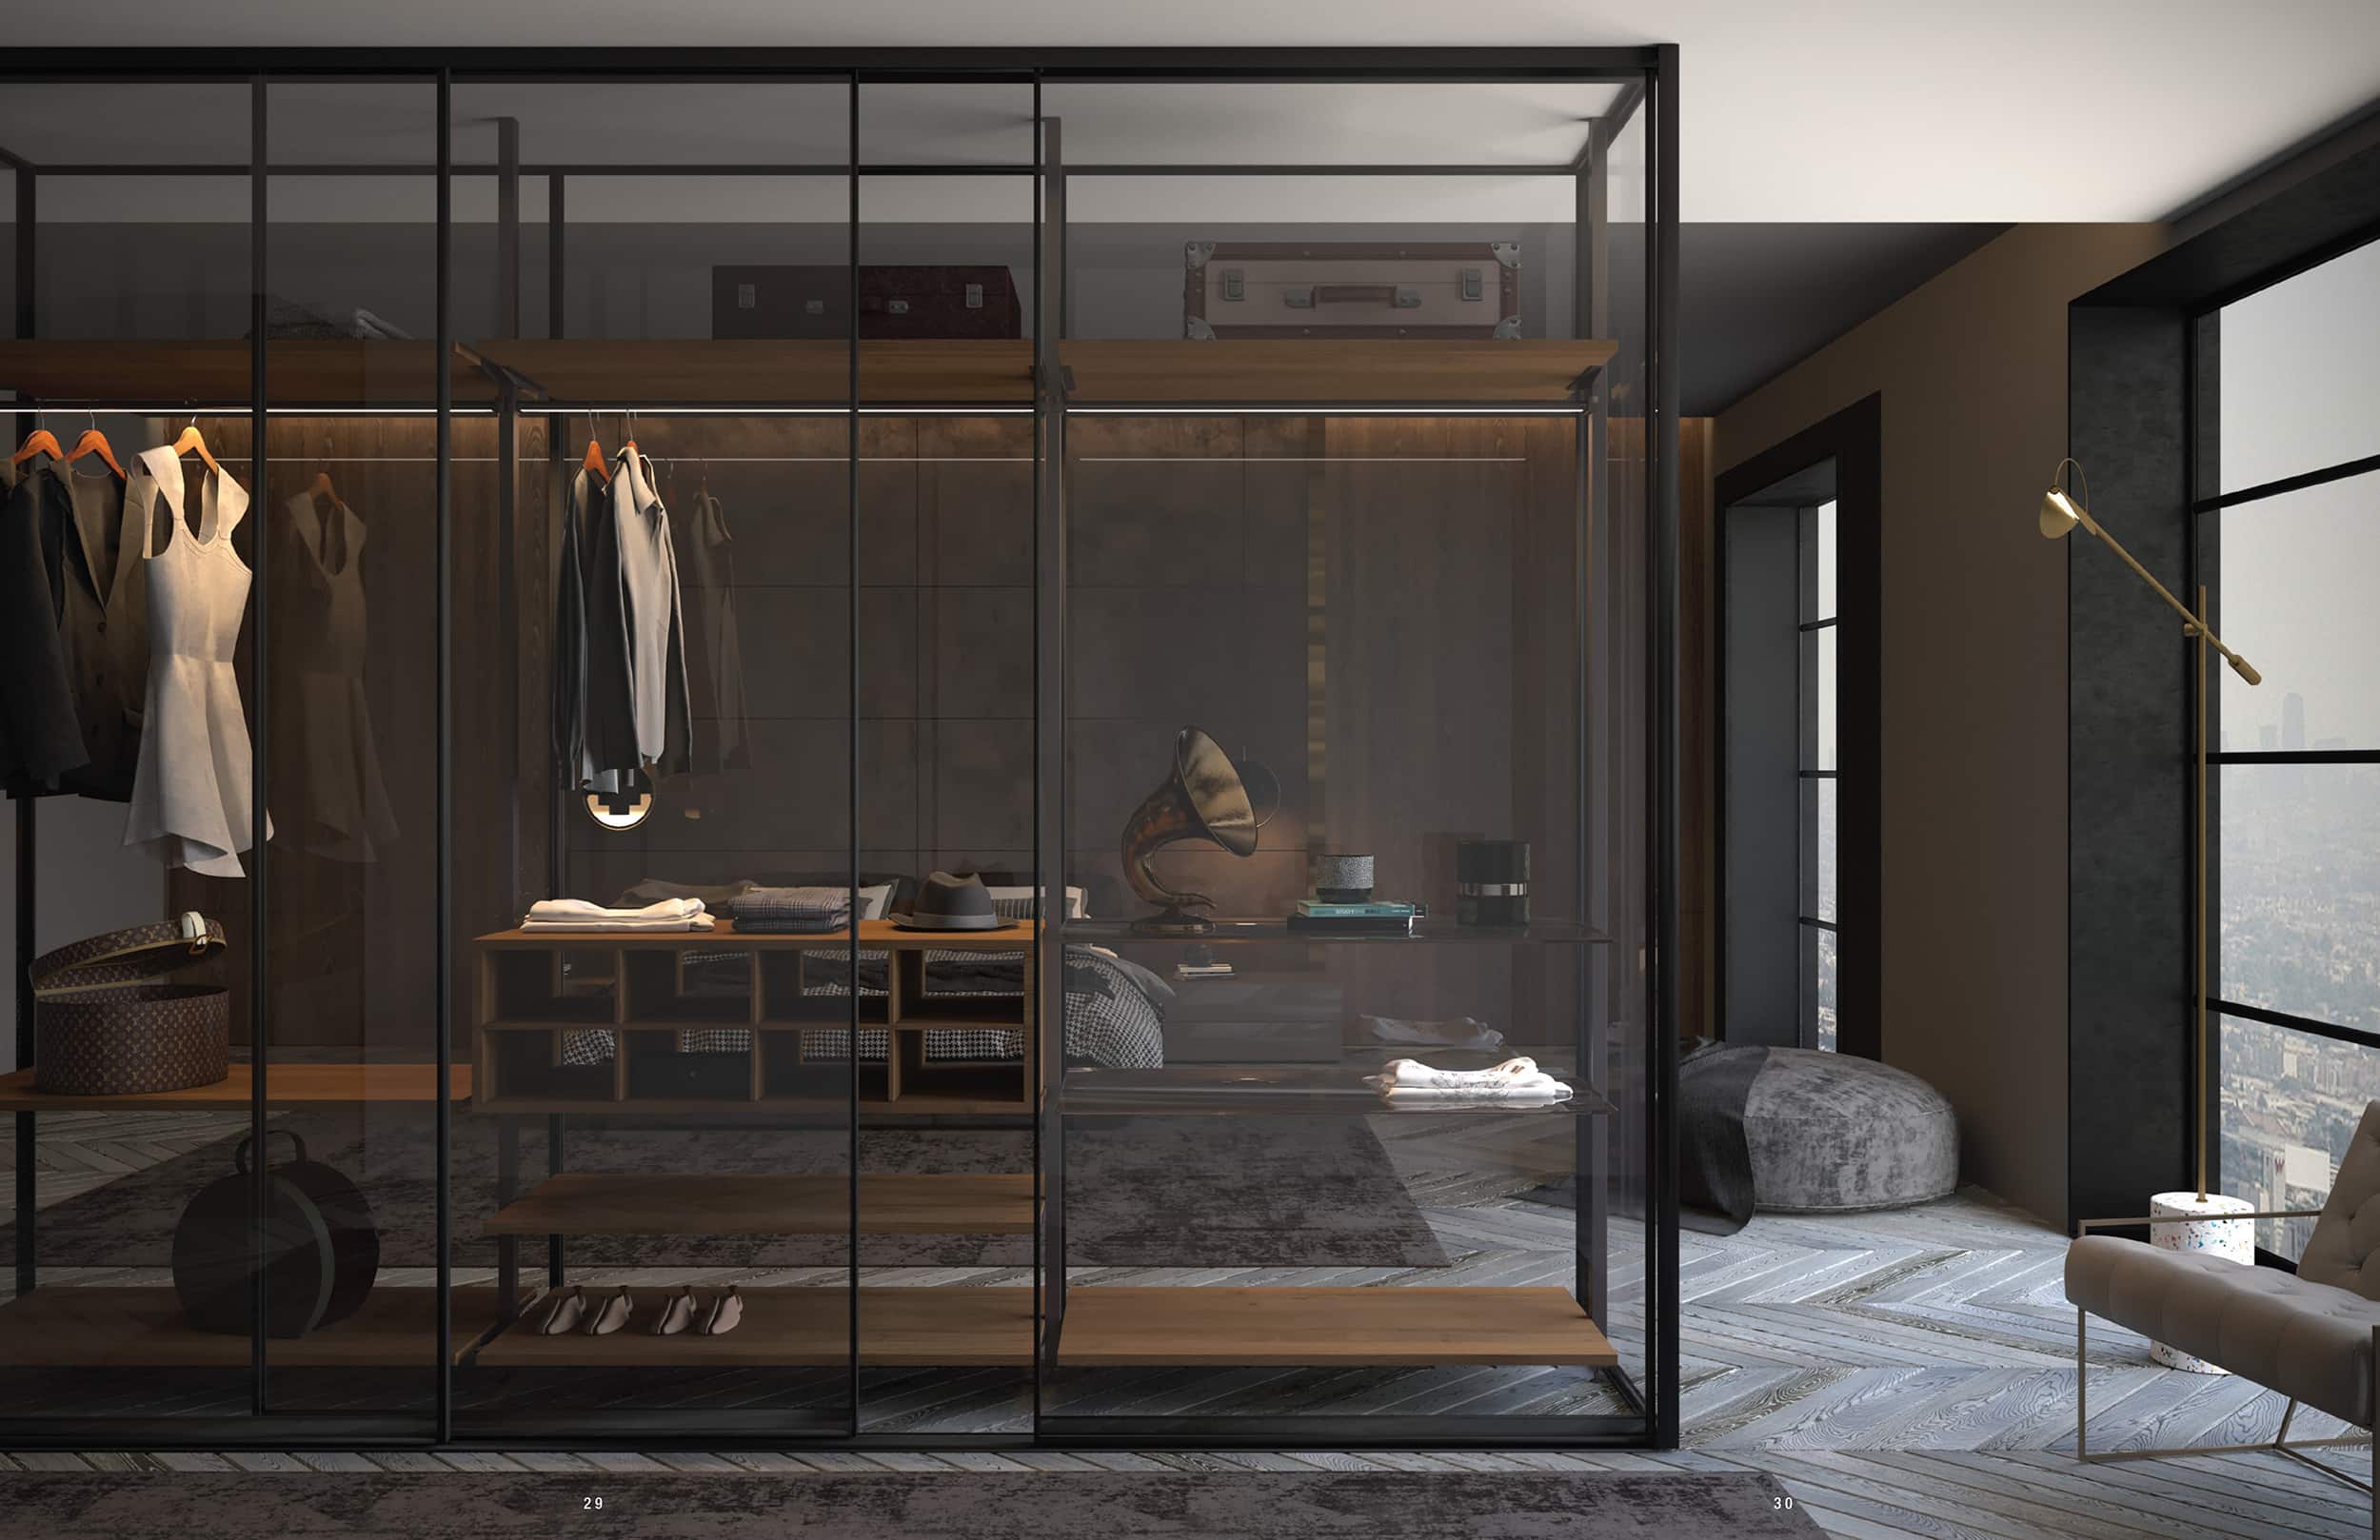 Closets with modern style. Make a custom space that is the perfect storage system for your clothes, accessories, or anything else that you need.